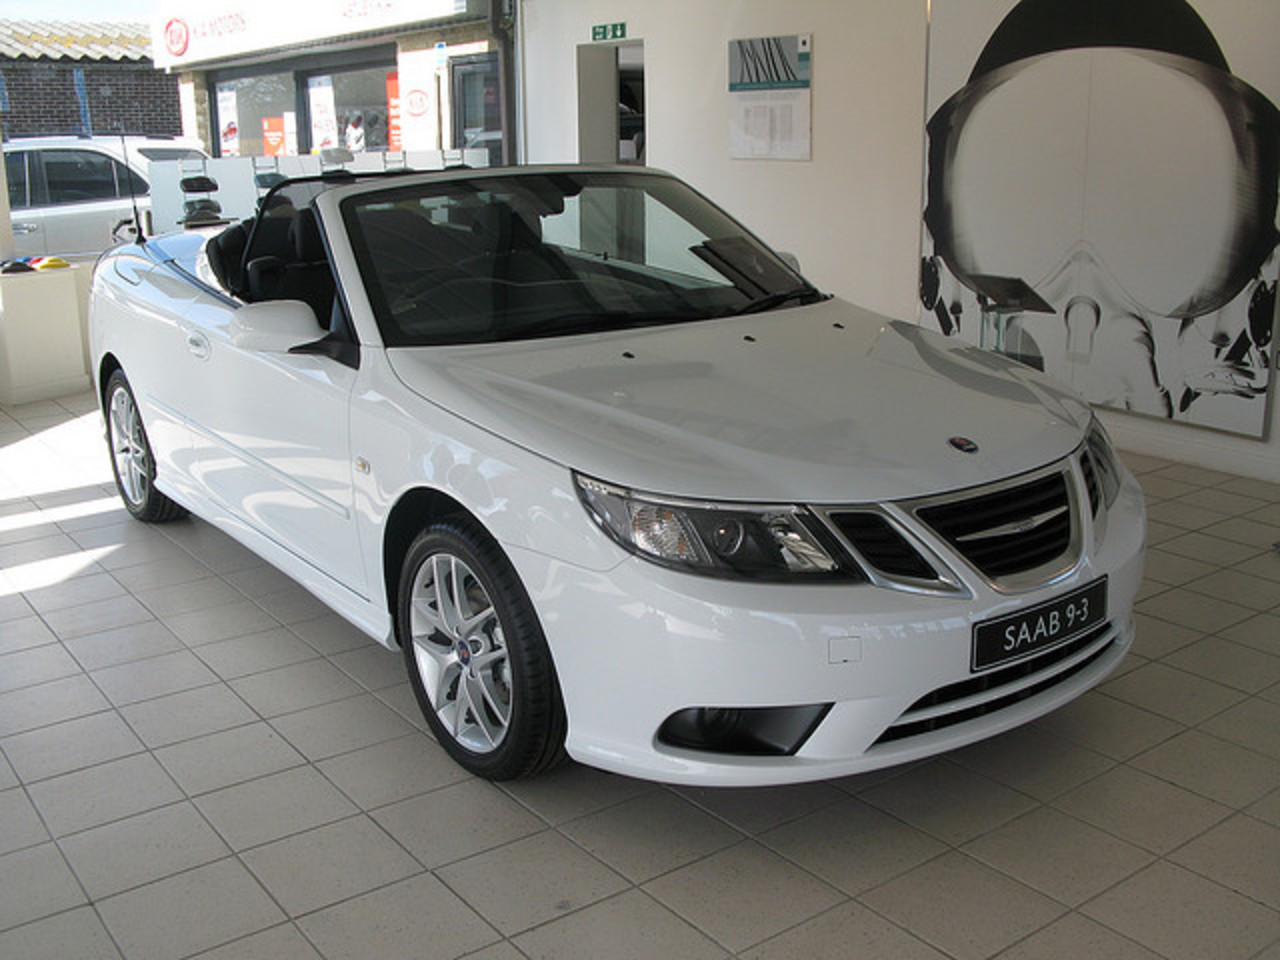 New Saab 9-3 Convertible in White | Flickr - Photo Sharing!